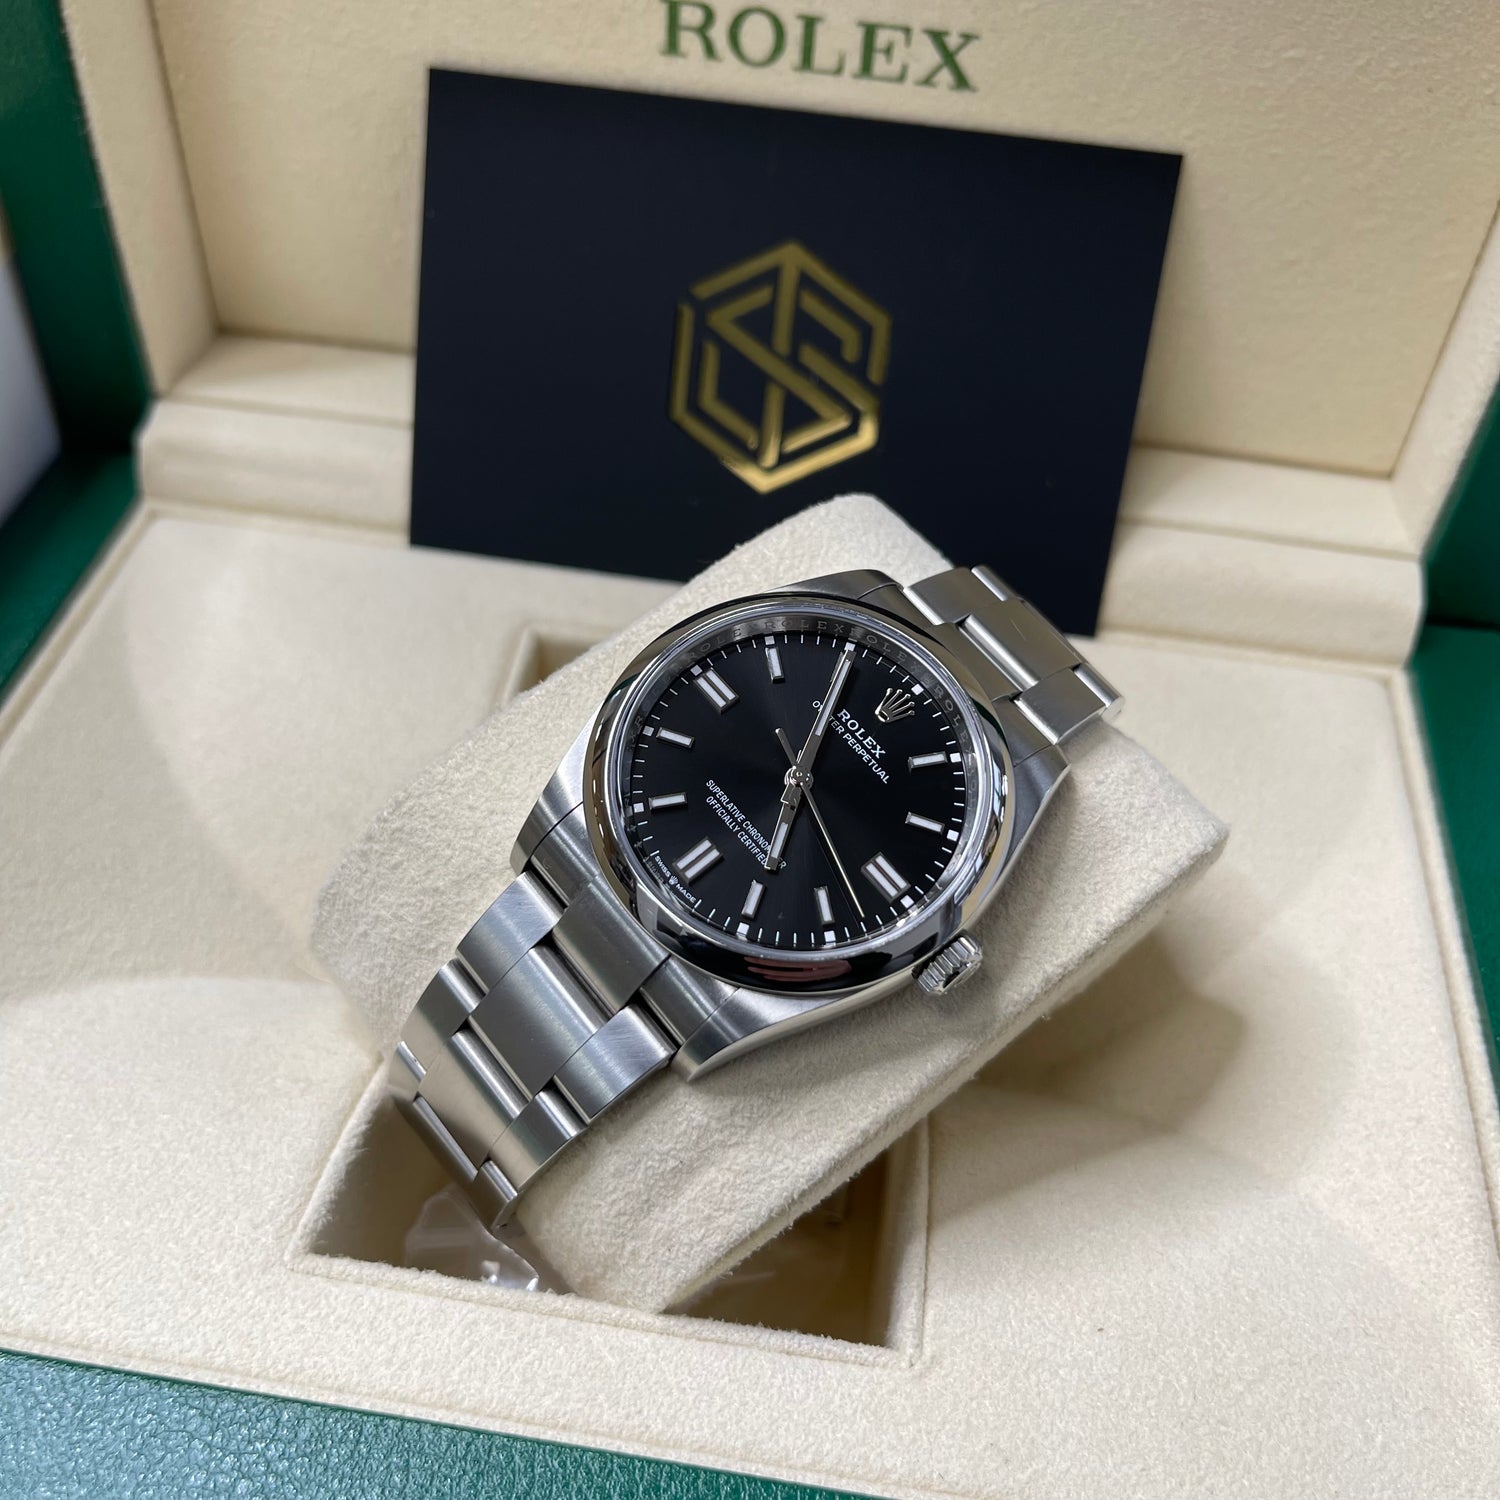 Rolex Oyster Perpetual 36 126000 Black Dial Excellent Condition 2020 Watch